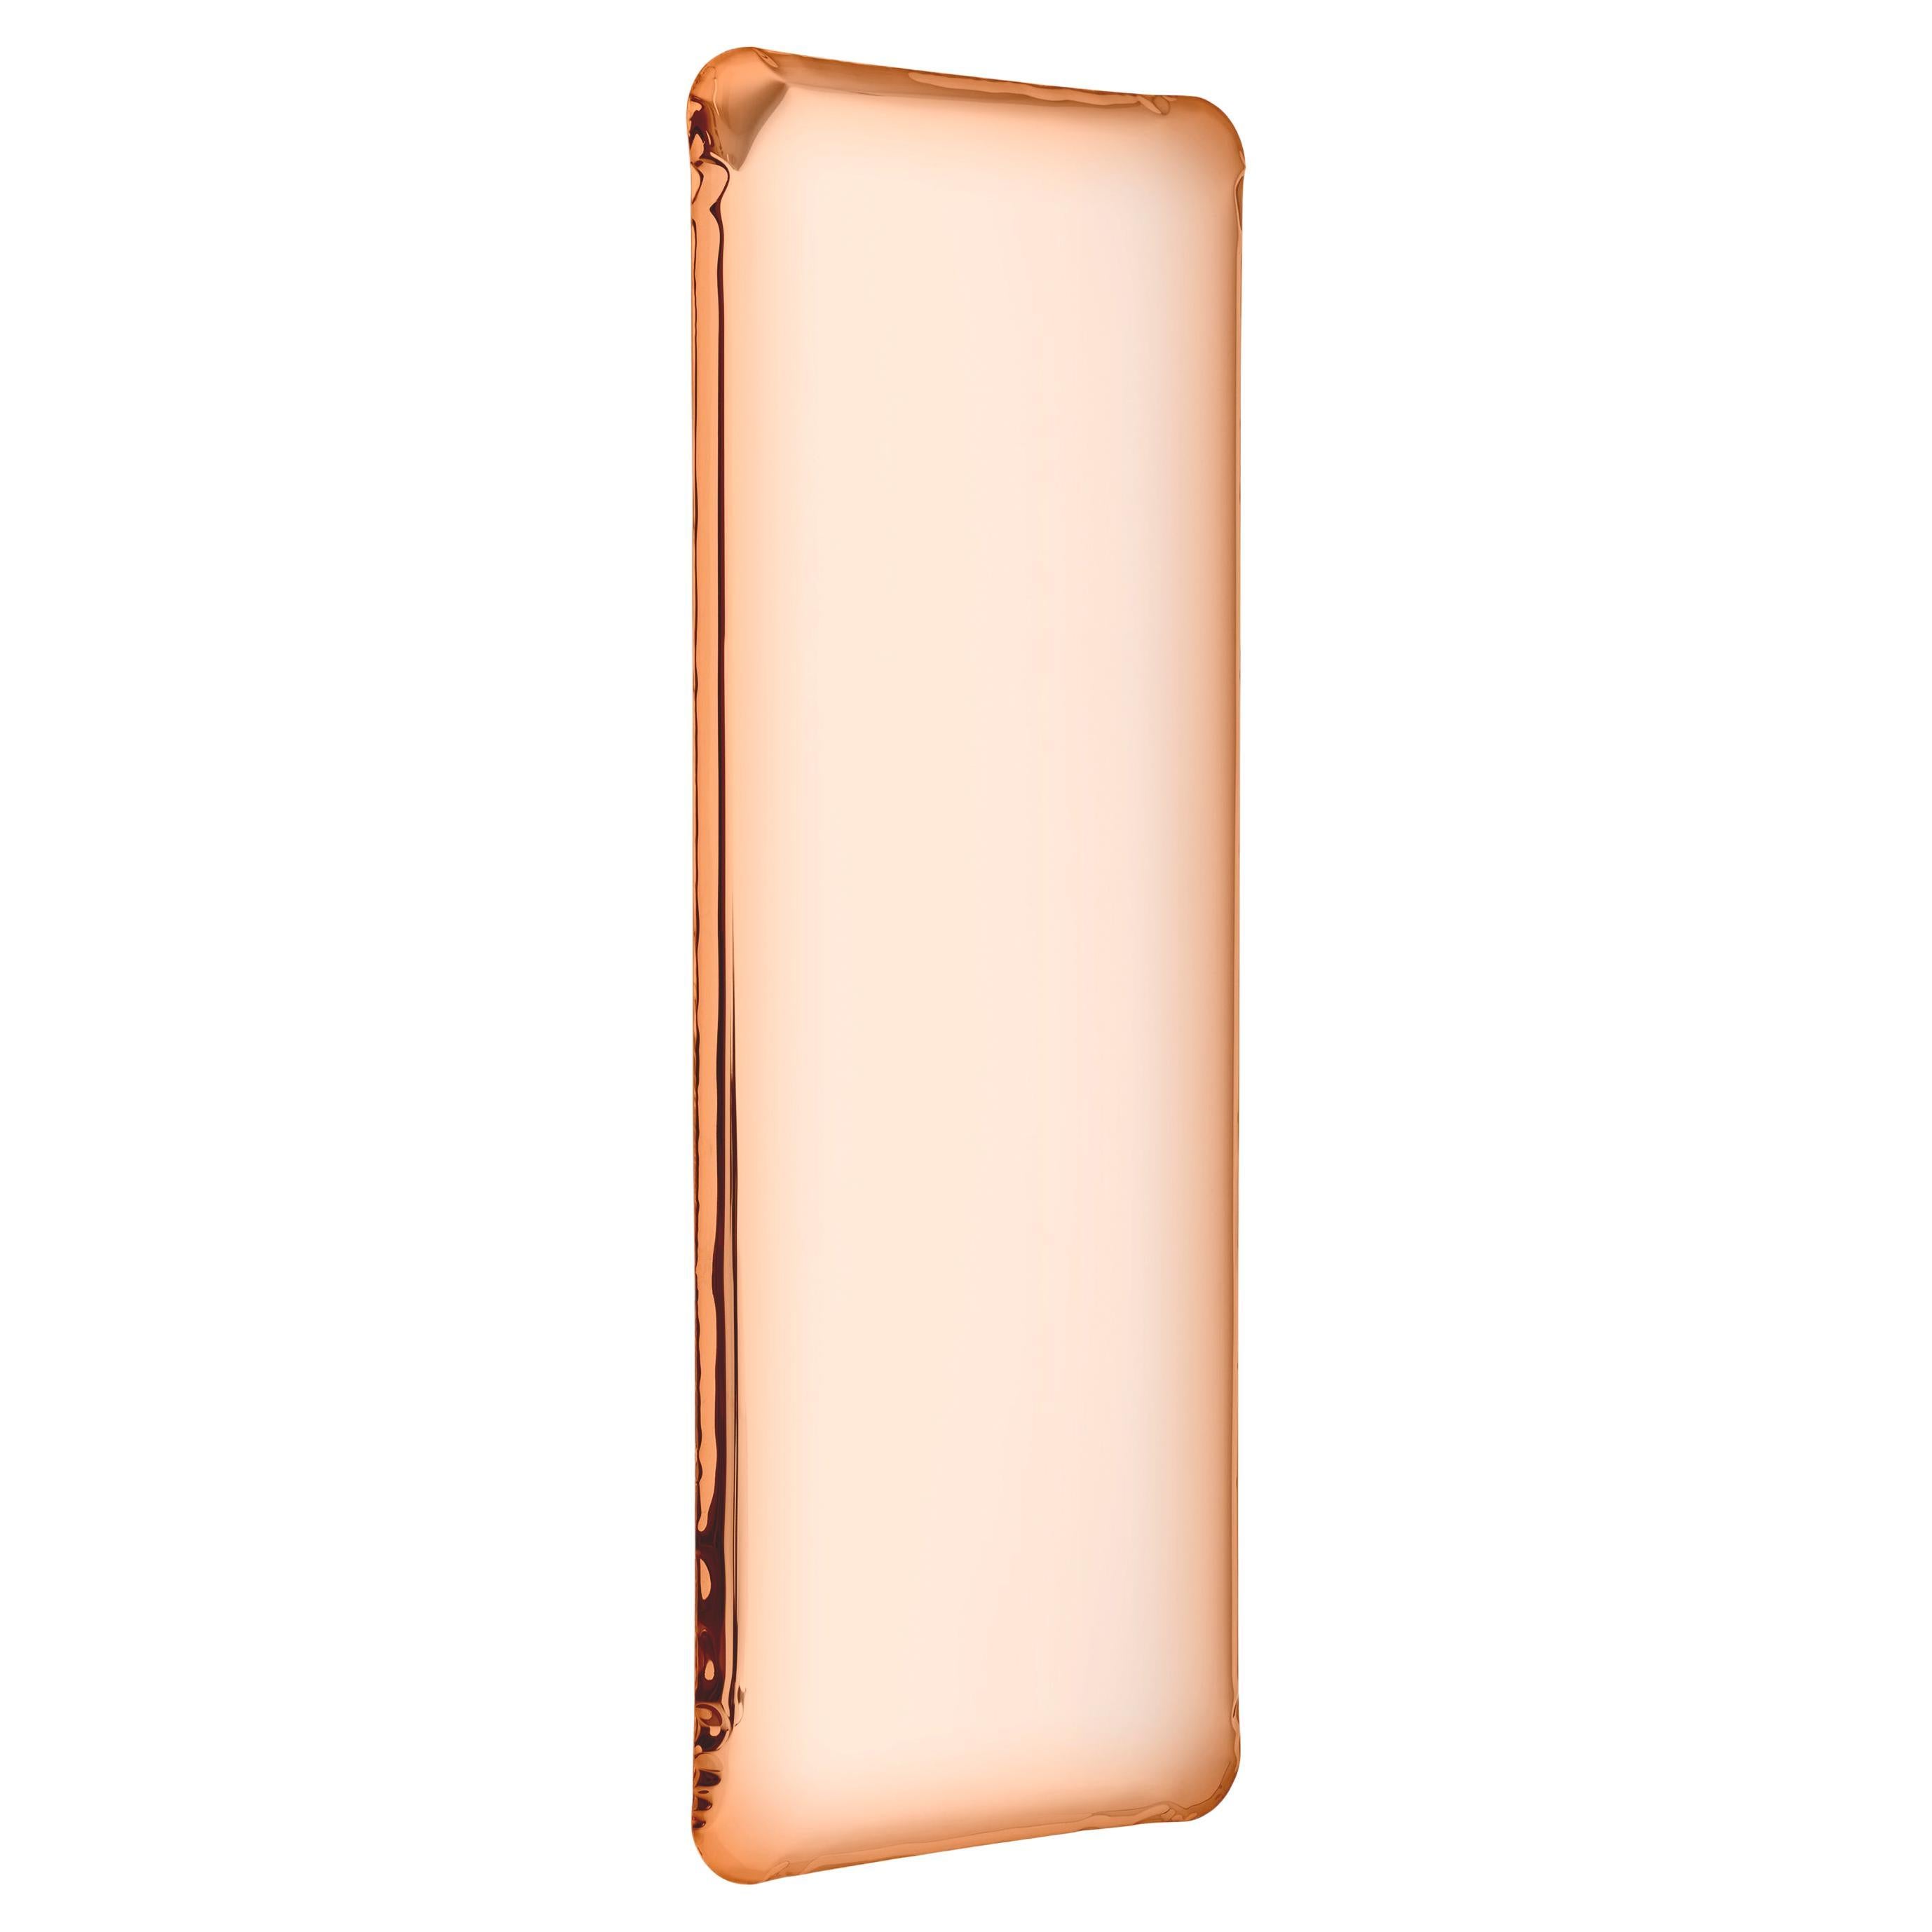 Tafla Q1 Polished Stainless Steel Rose Gold Color Wall Mirror by Zieta